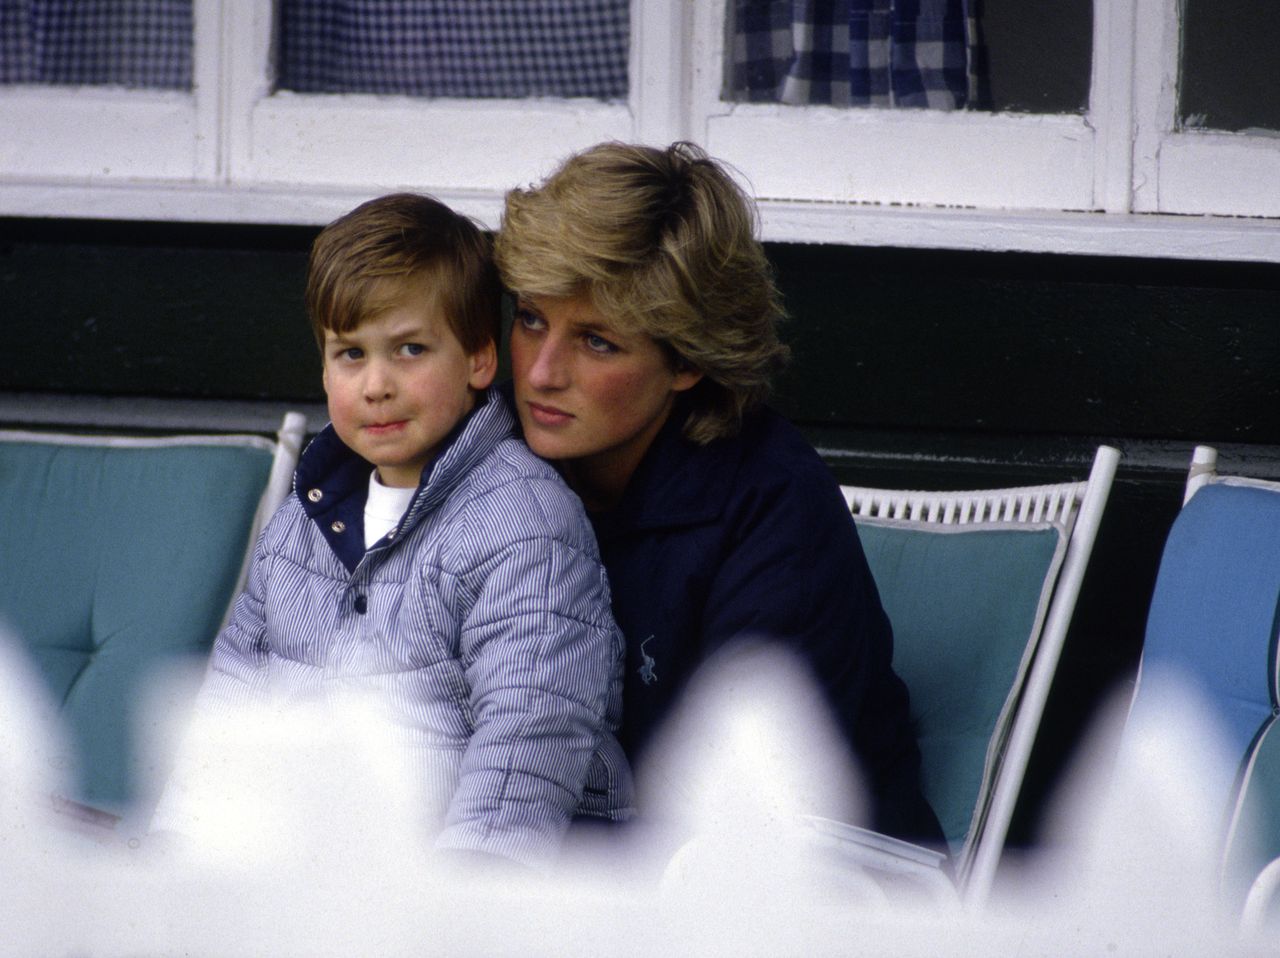 Princess Diana's last moments: Firefighter reveals final words